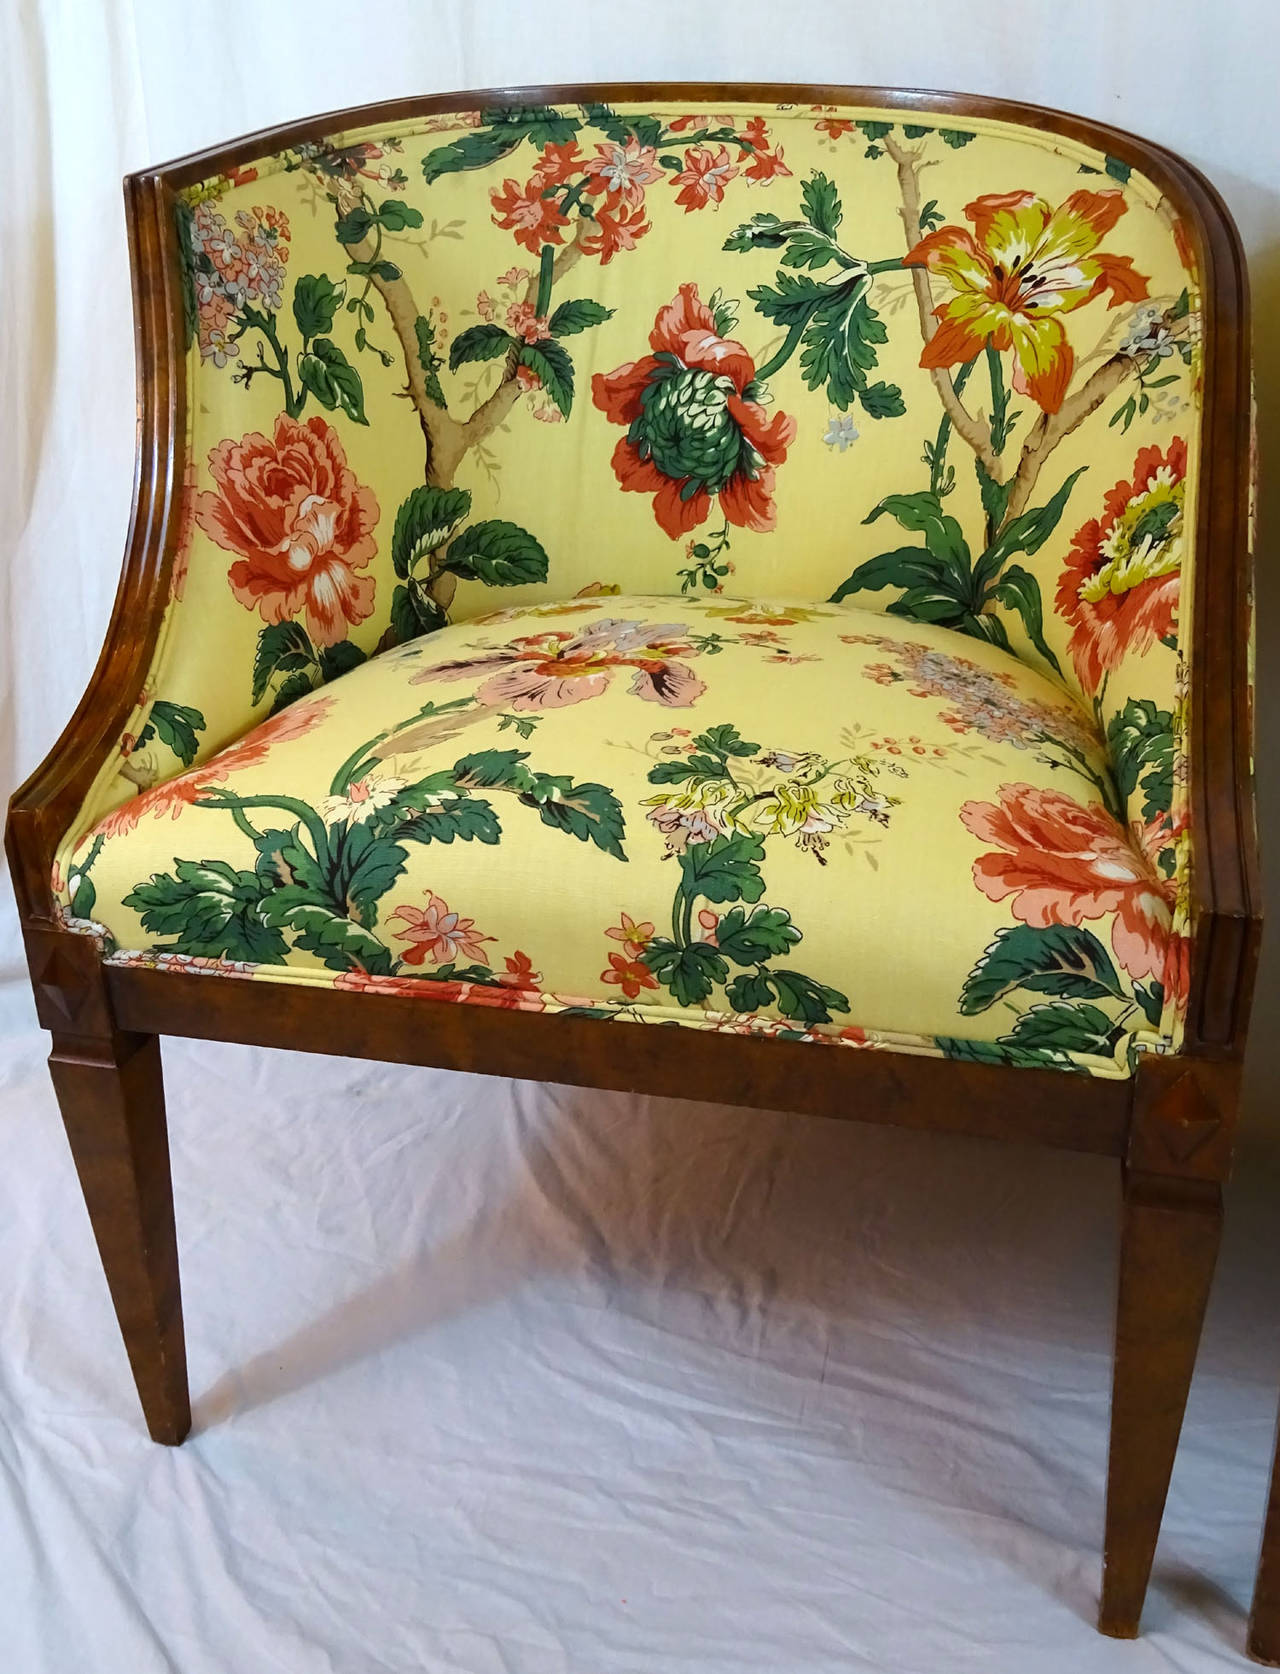 Left and right pair of stained beechwood portrait chairs, one side has a high pointed arm and one side has a lower curved arm. Upholstered in a yellow floral fabric with pink, blue, and yellow flowers, amongst green vines and leaves.